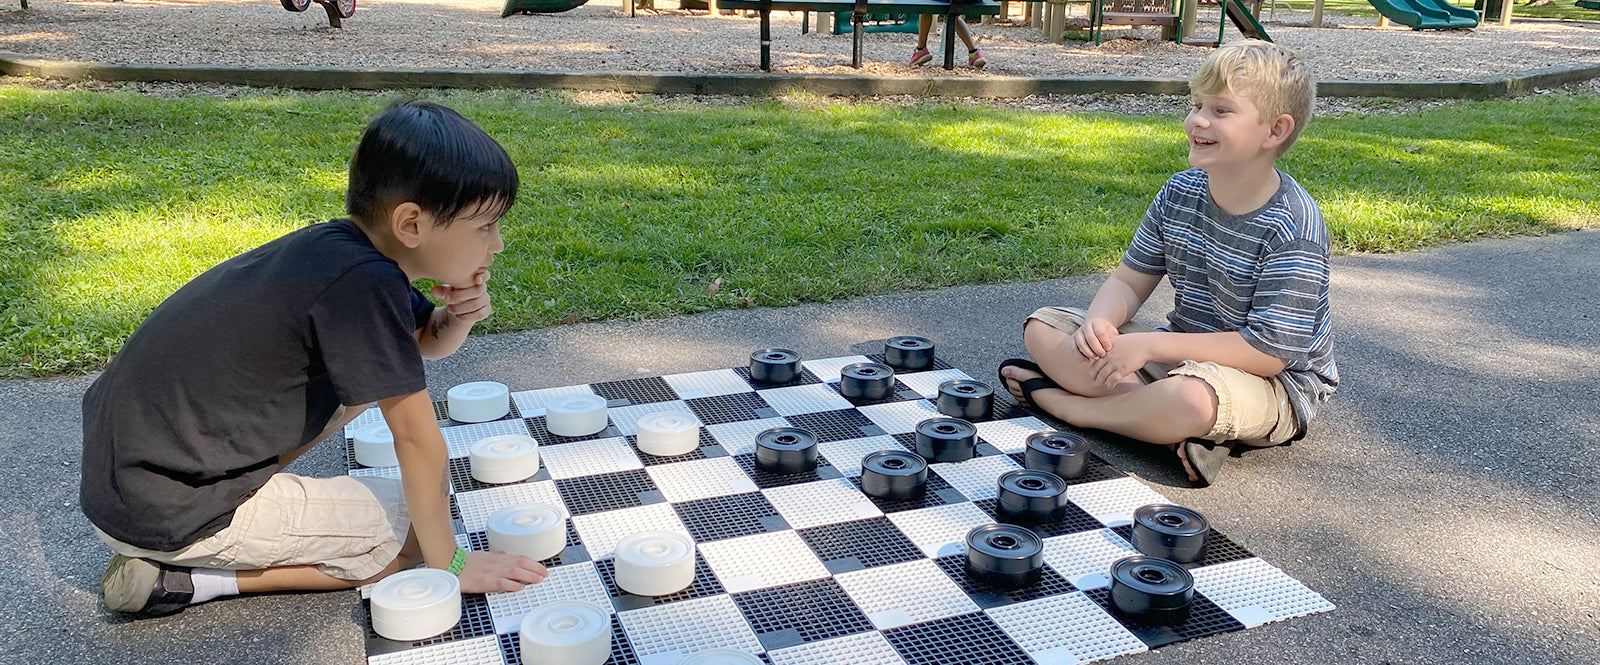 Two young boys play outdoor checkers in the park.